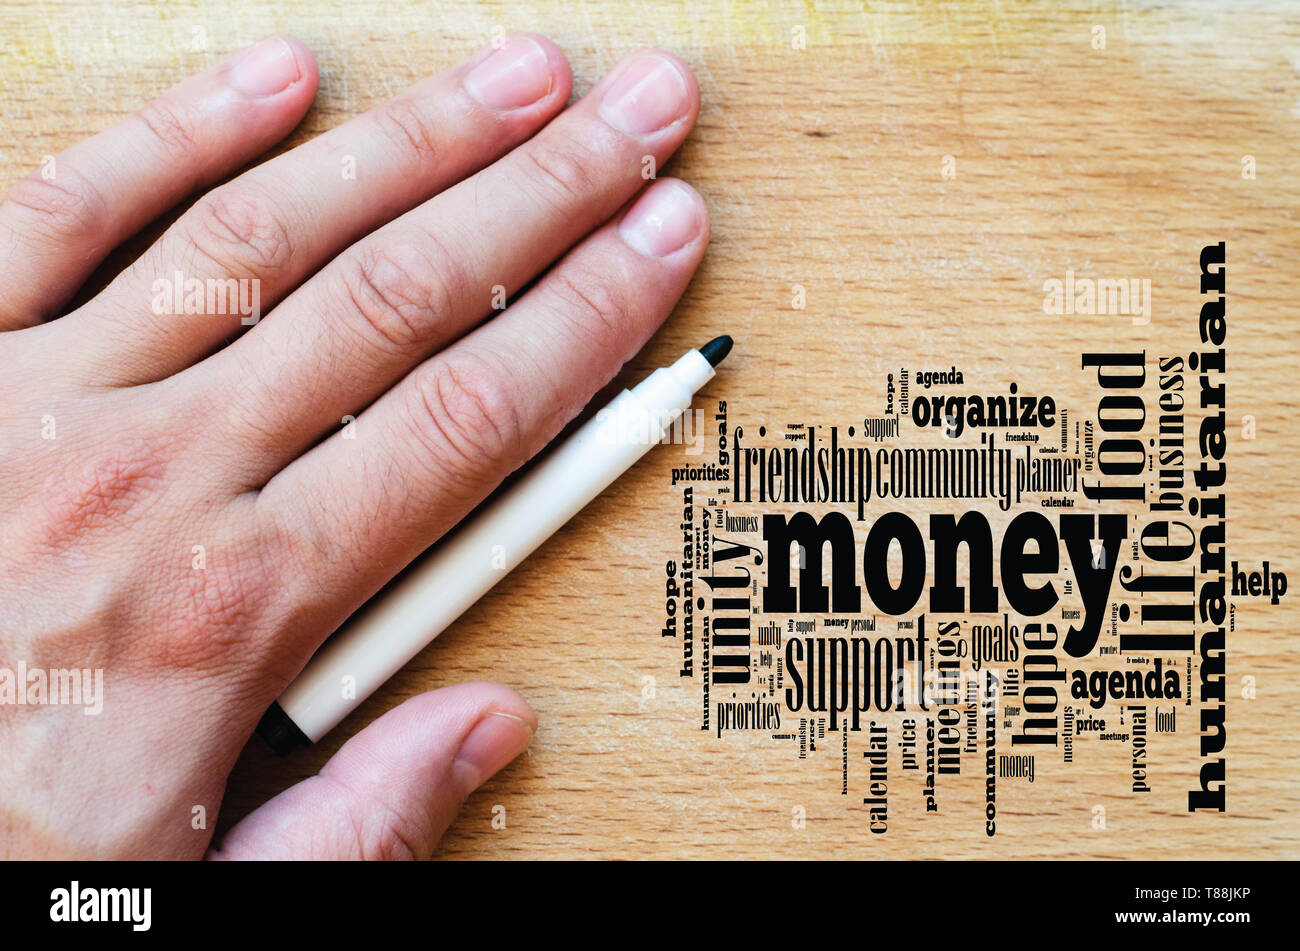 Money word cloud business concept over wooden background Stock Photo